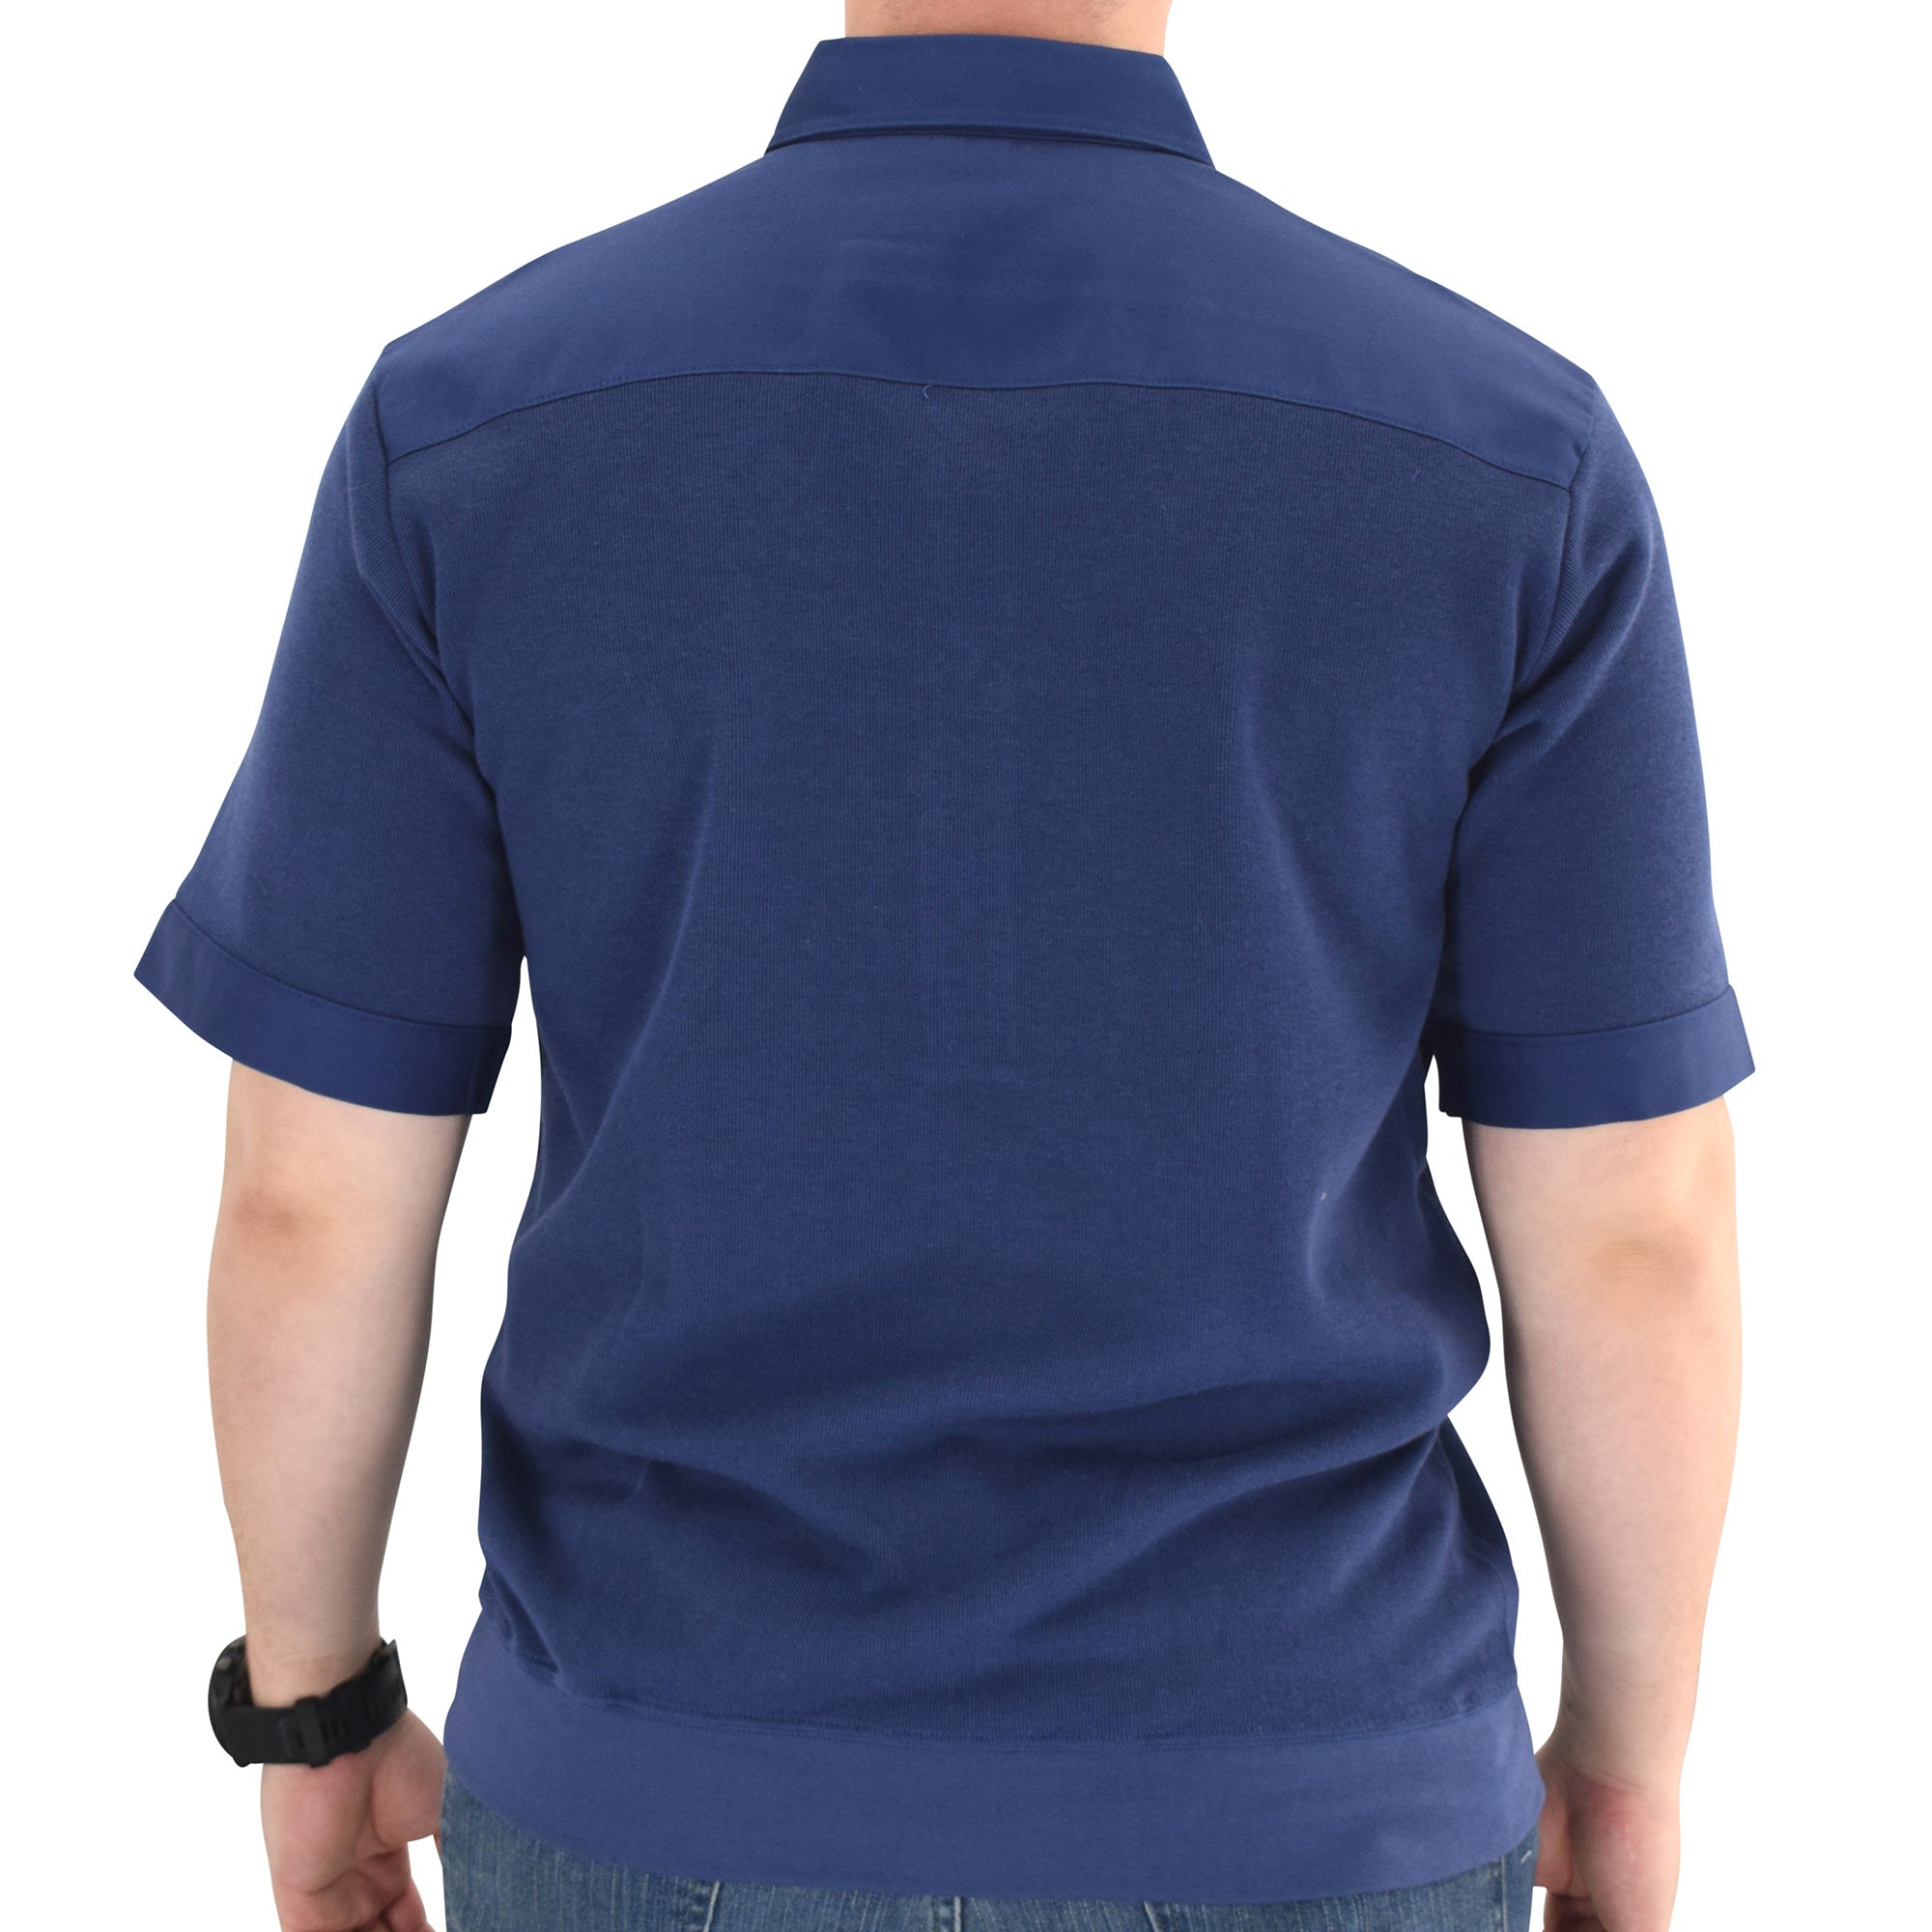 Solid Knit Banded Bottom Shirt with Woven Chest Panel 6041-22N Big and Tall - Navy - theflagshirt